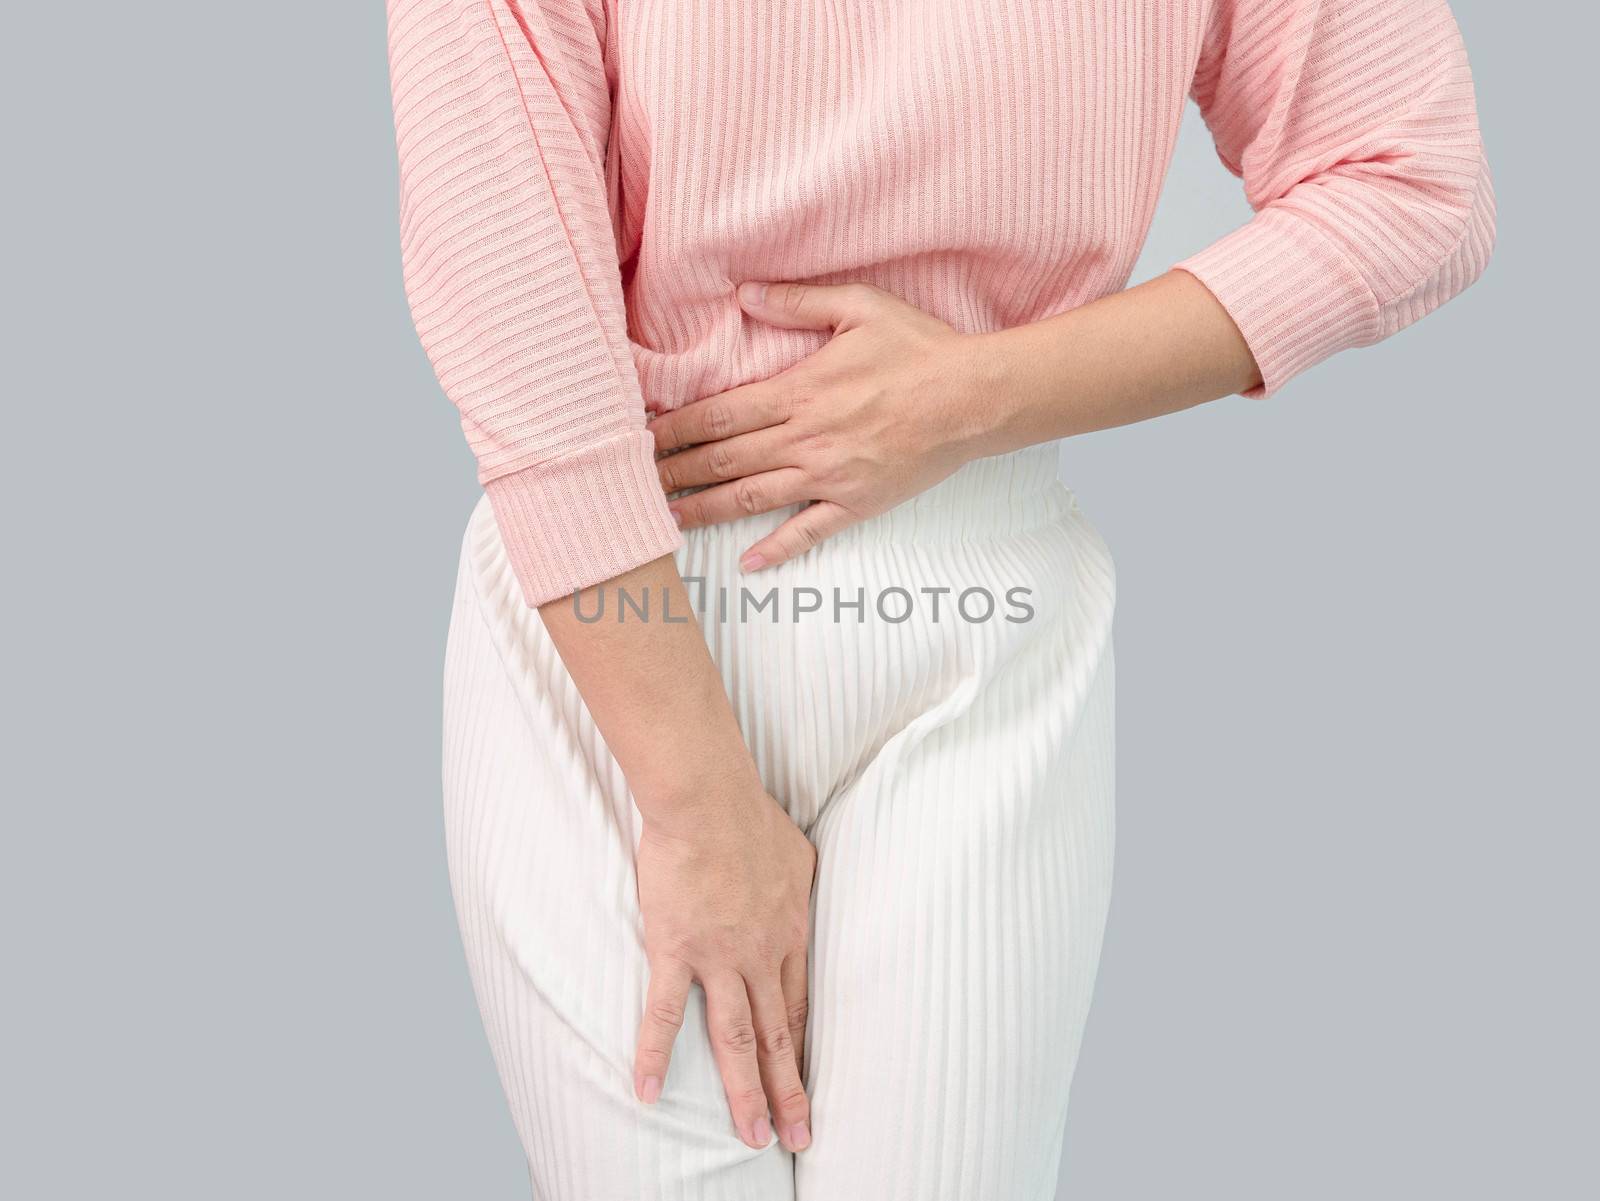 Unhealthy Asian women suffer from abdominal pain, irregular menstruation, isolated on a grey background.